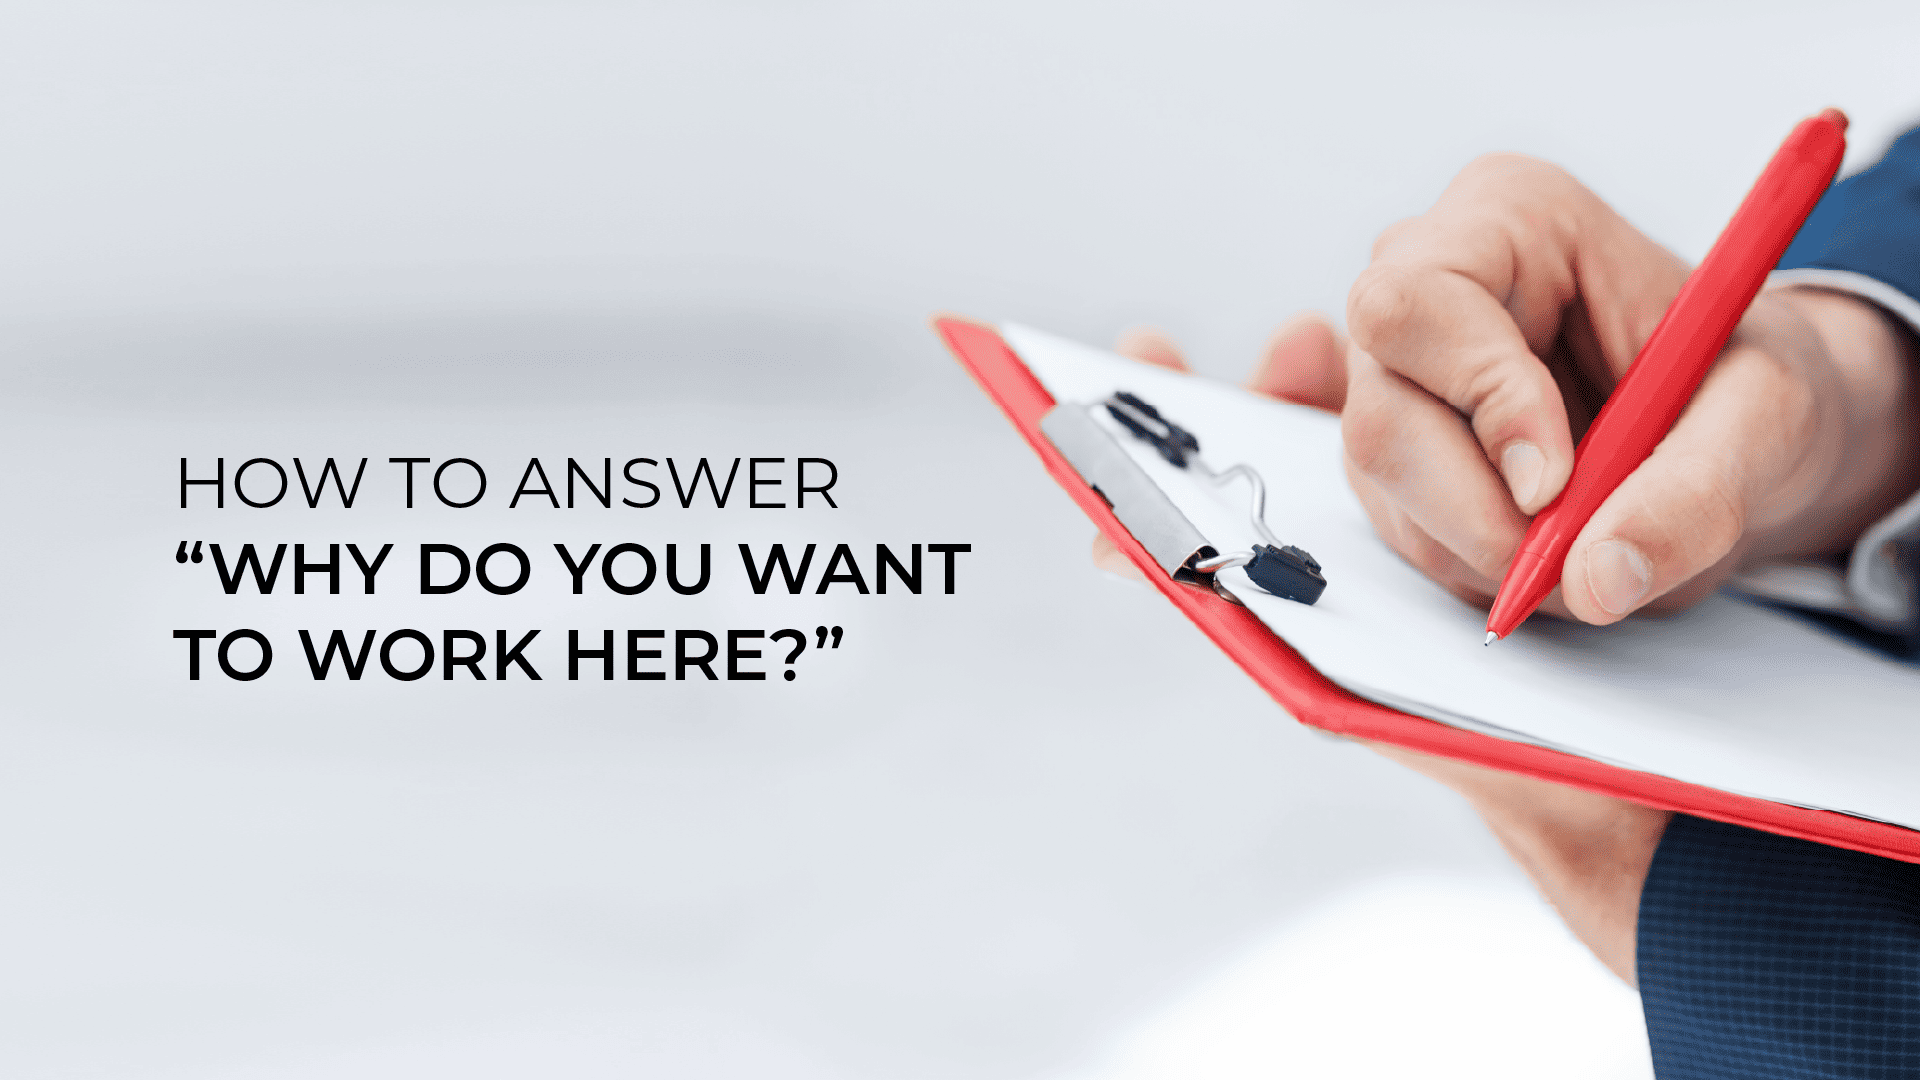 How Best To Answer: “Why Do You Want To Work Here?